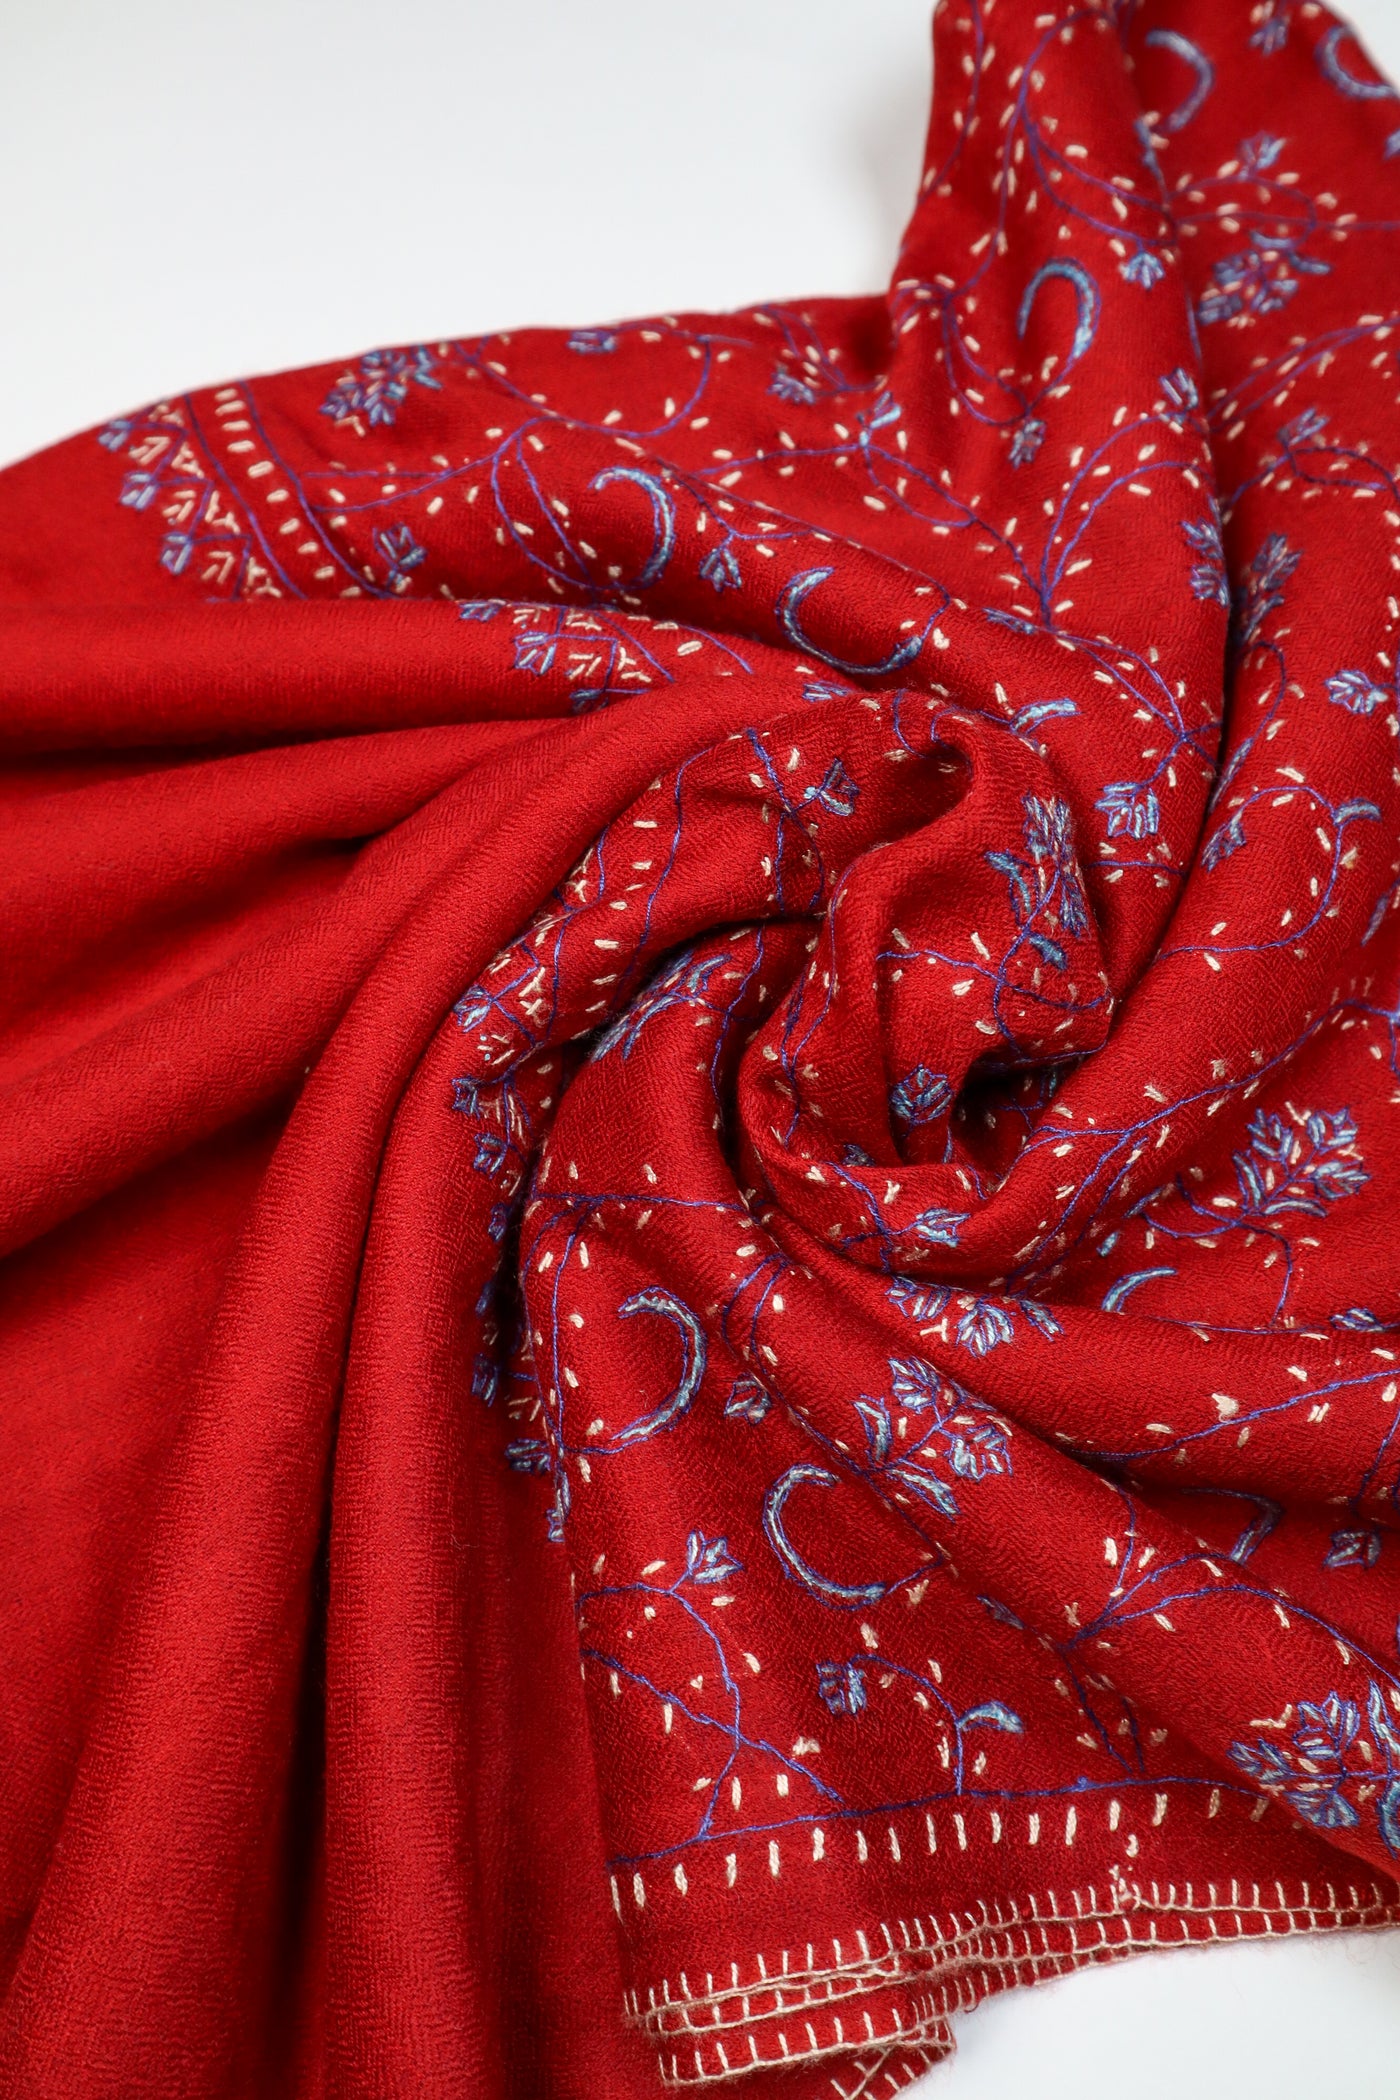 Premium Quality Fully Hand embroidered Red pashmina/Cashmere shawl